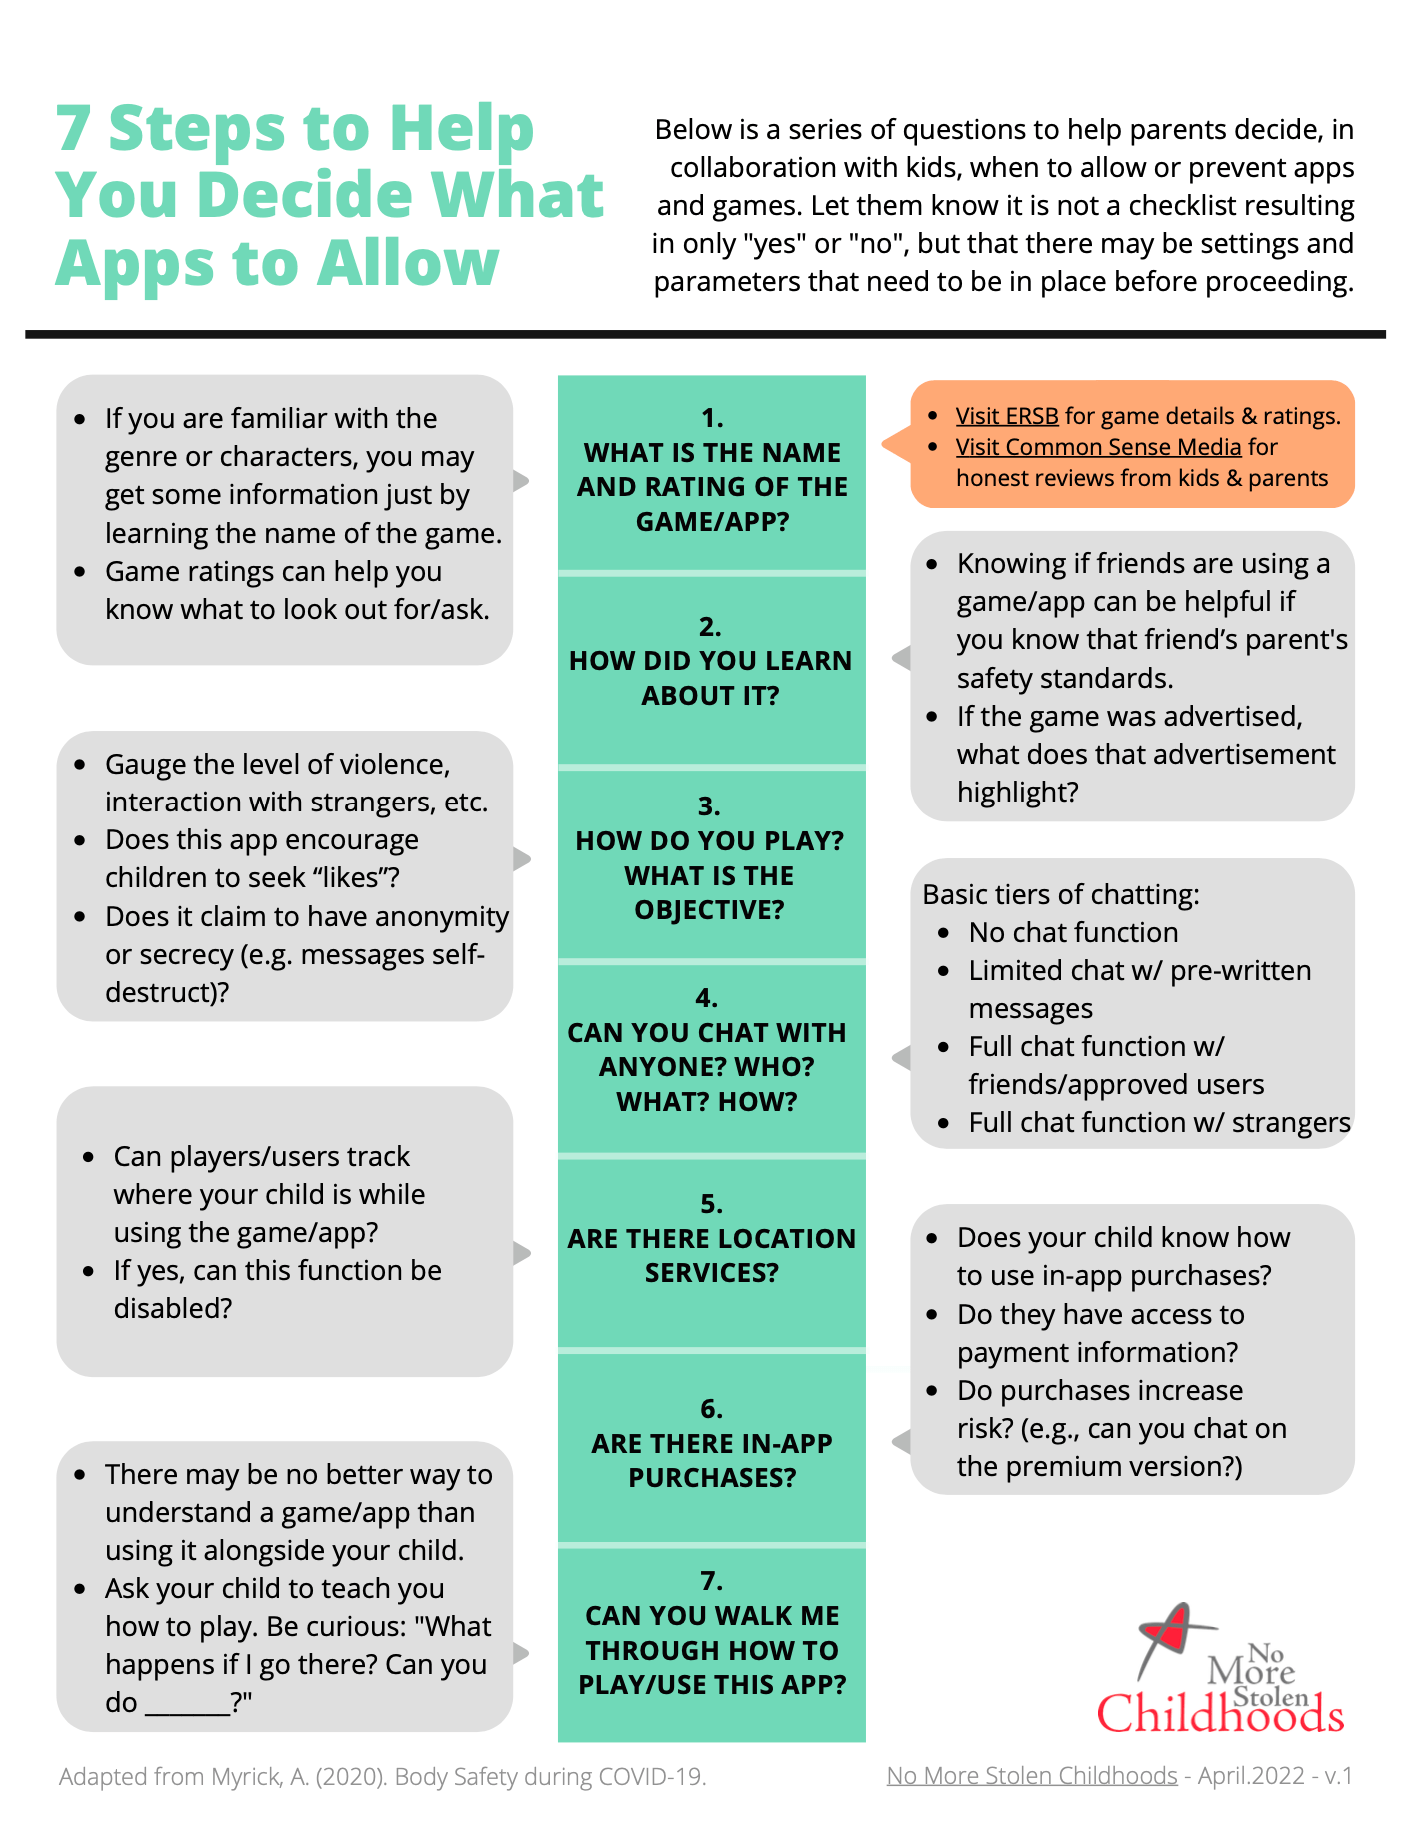 7 Steps to Help You Decide What Apps to Allow